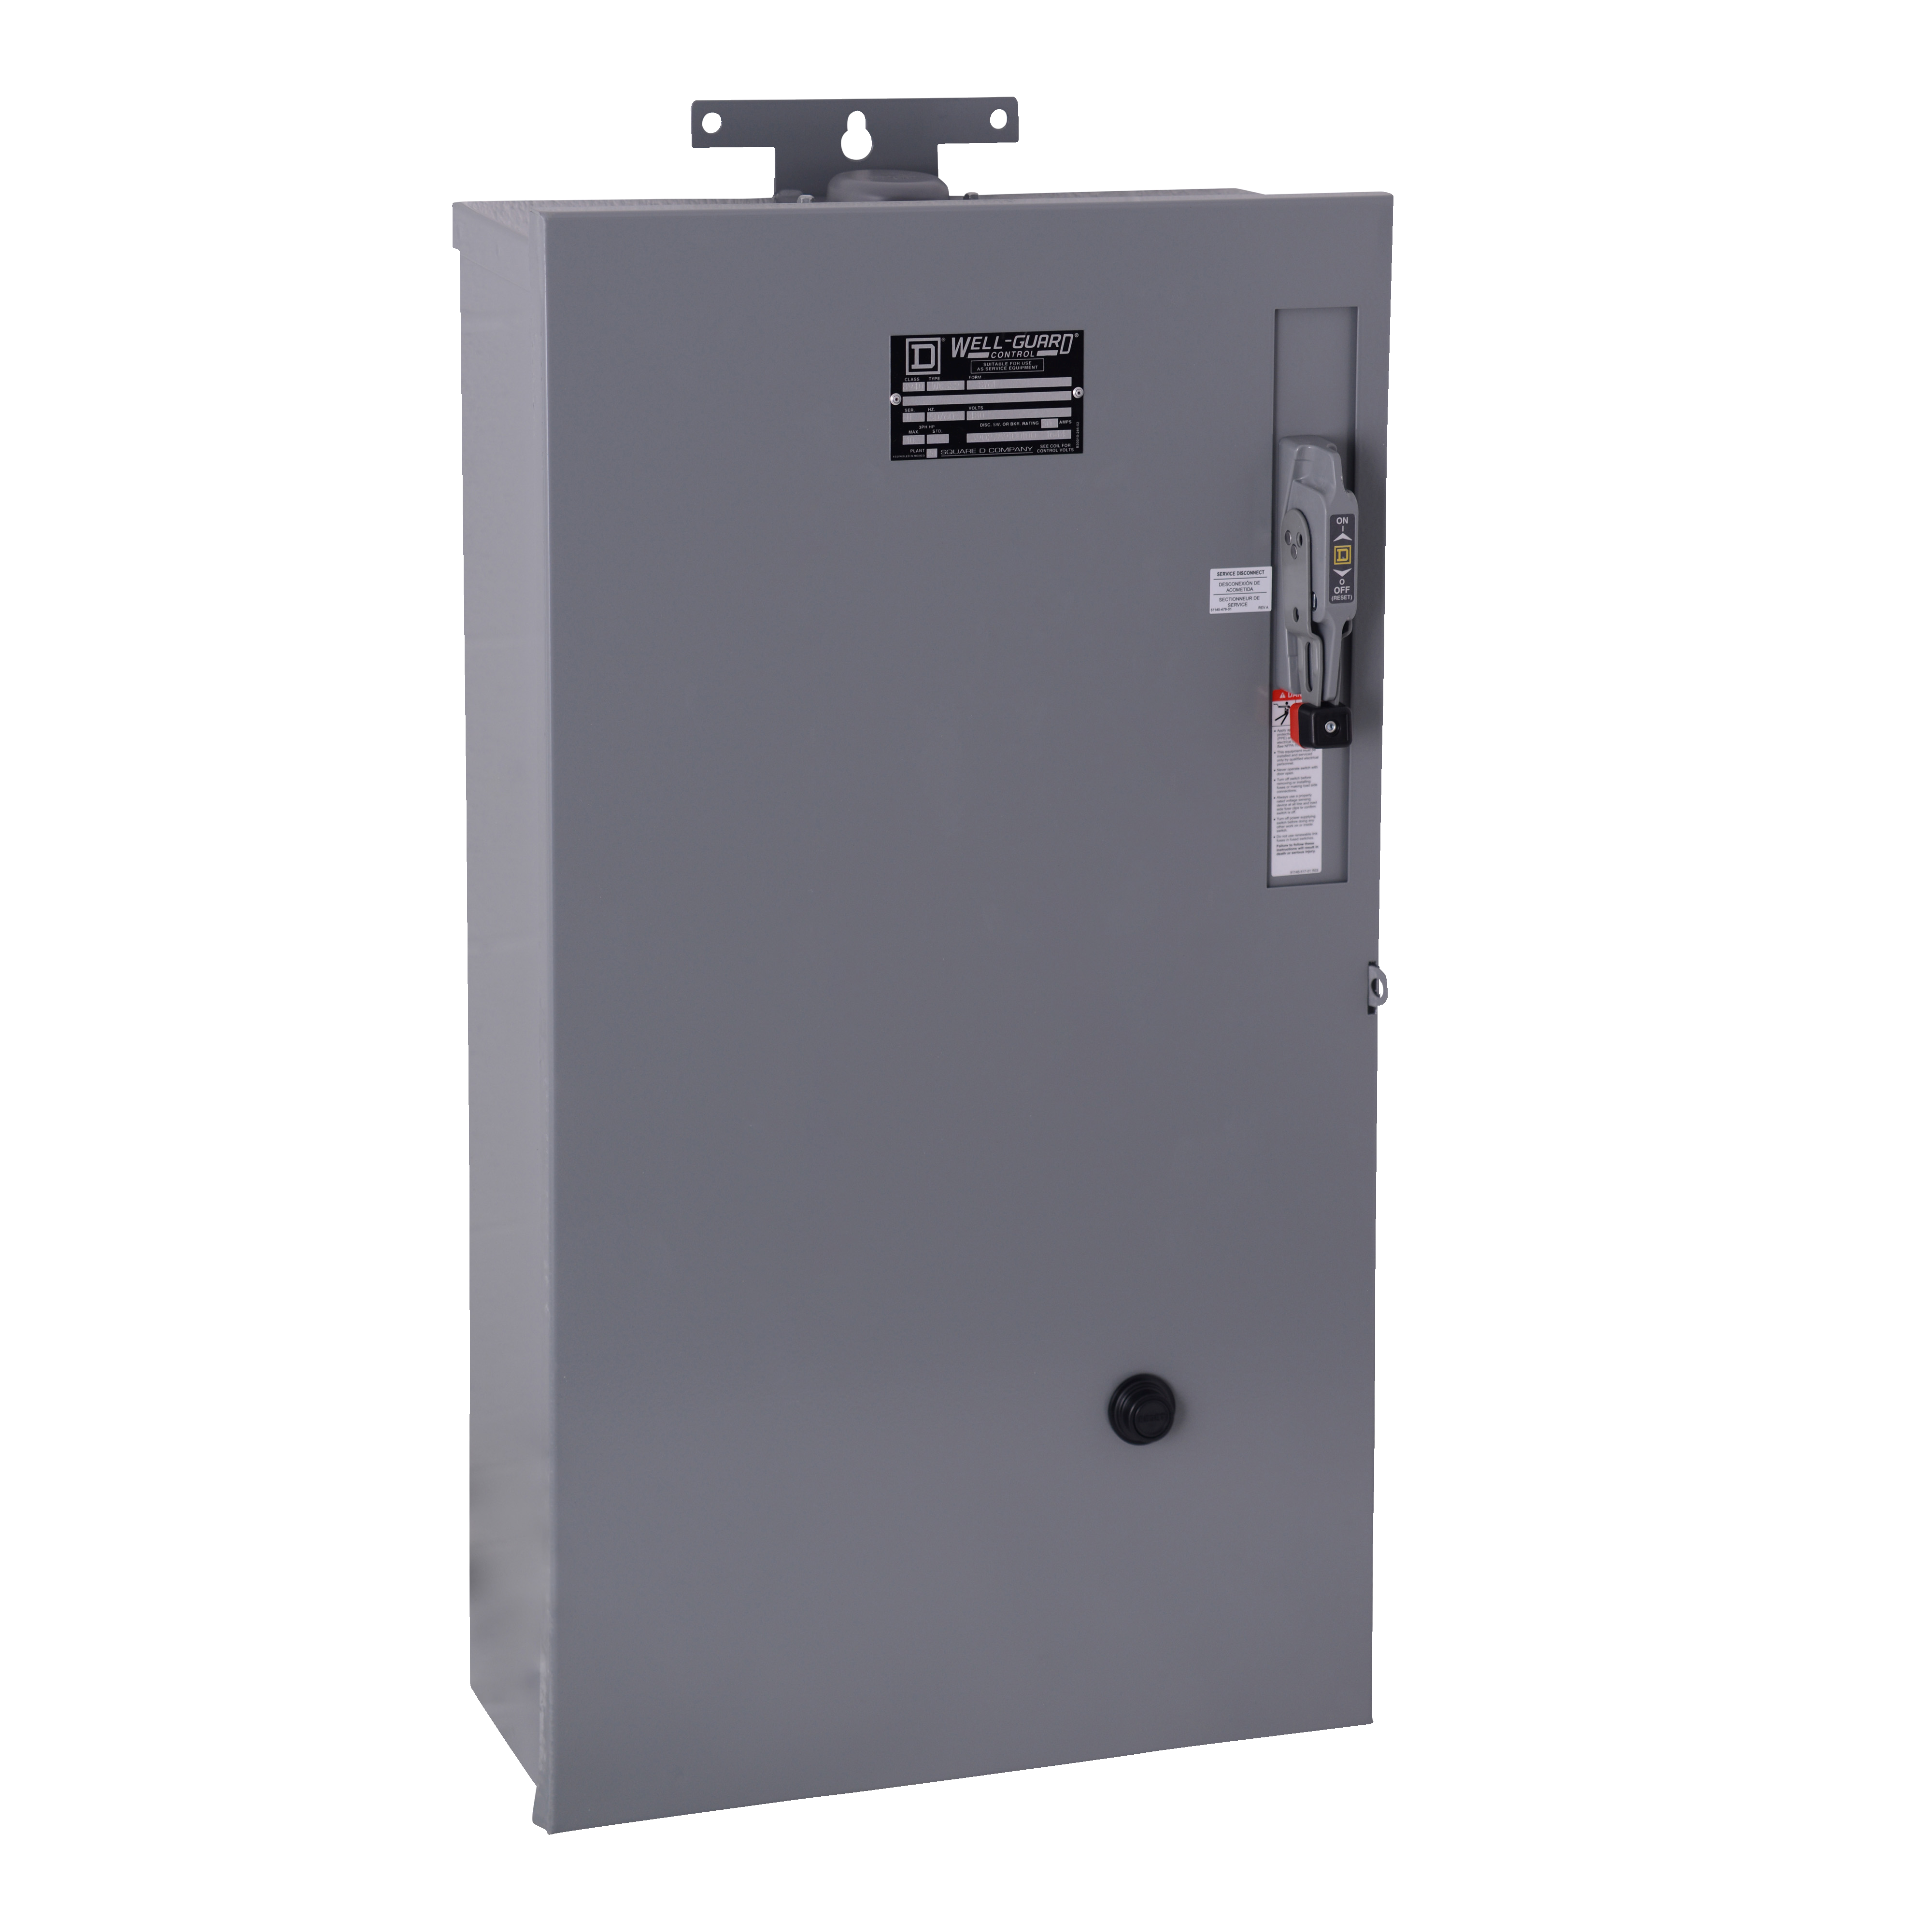 Pump Panel, NEMA Type S, Well Guard, oil field, Size 2, 45A, 25 HP, 60A fusible disconnect, melting alloy overload, 110/120 VAC 50/60 Hz coil, NEMA 3R